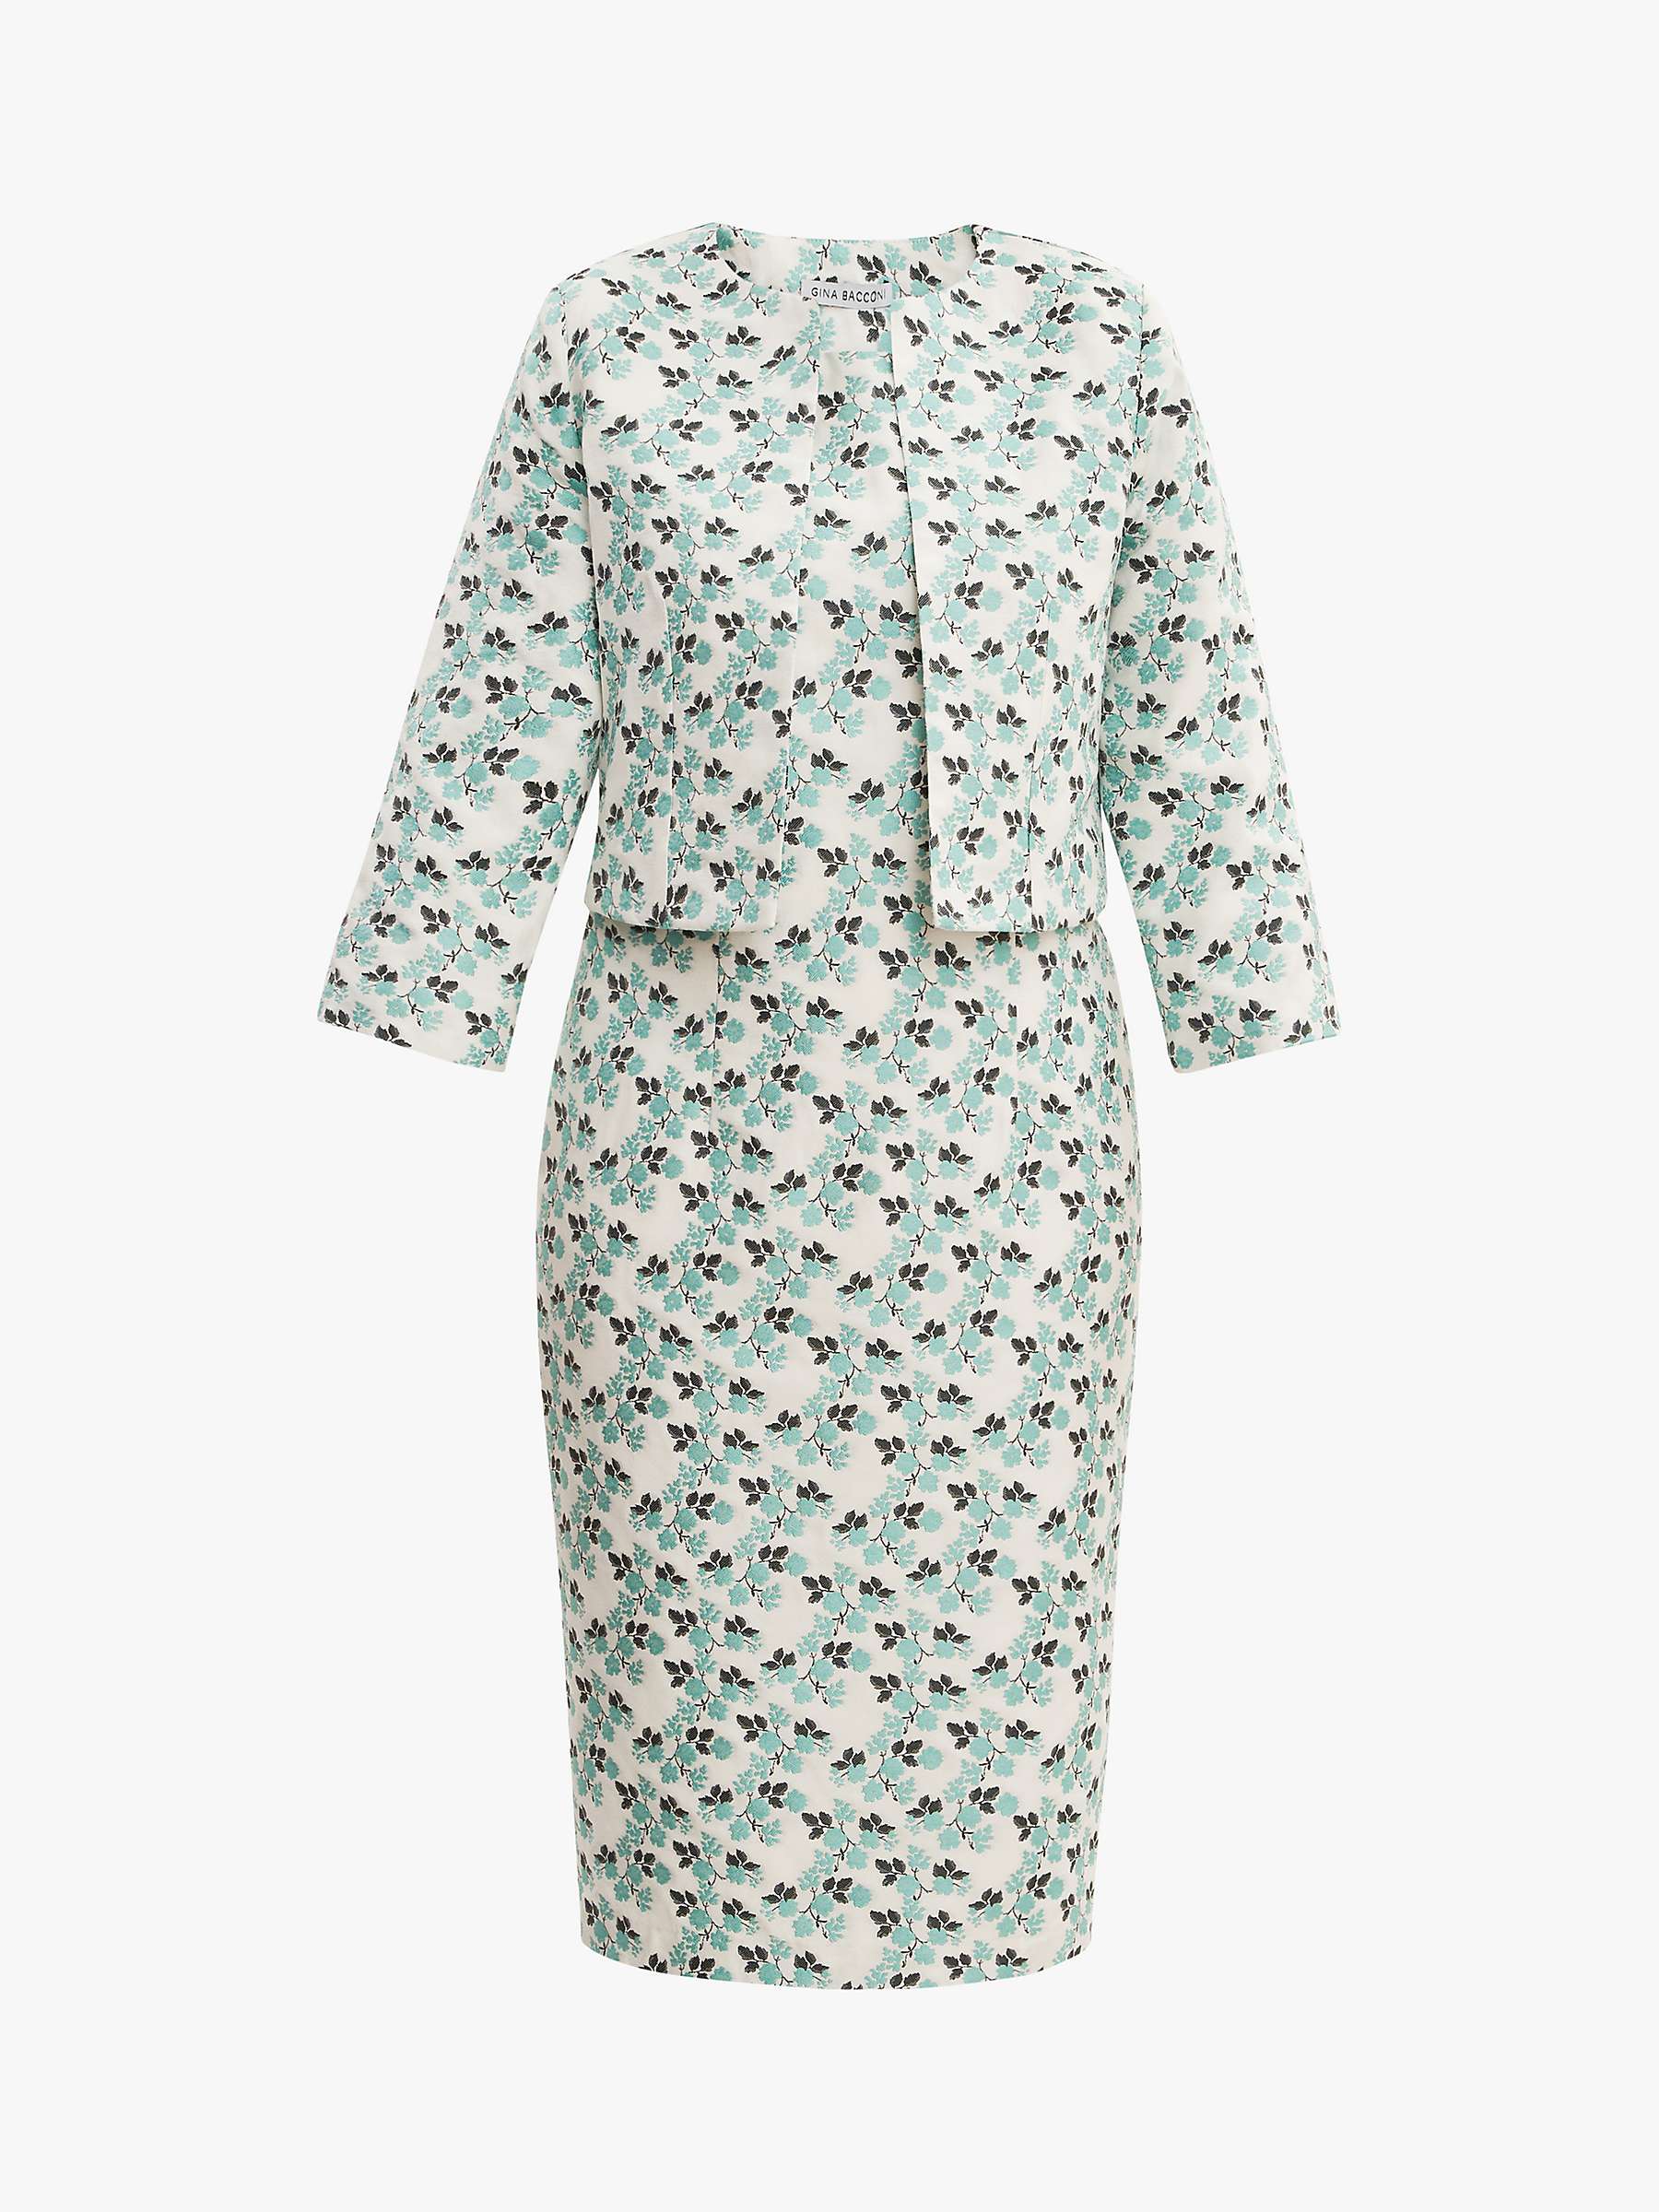 Buy Gina Bacconi Isannah Floral Jacquard Dress with Jacket, Mint/Multi Online at johnlewis.com